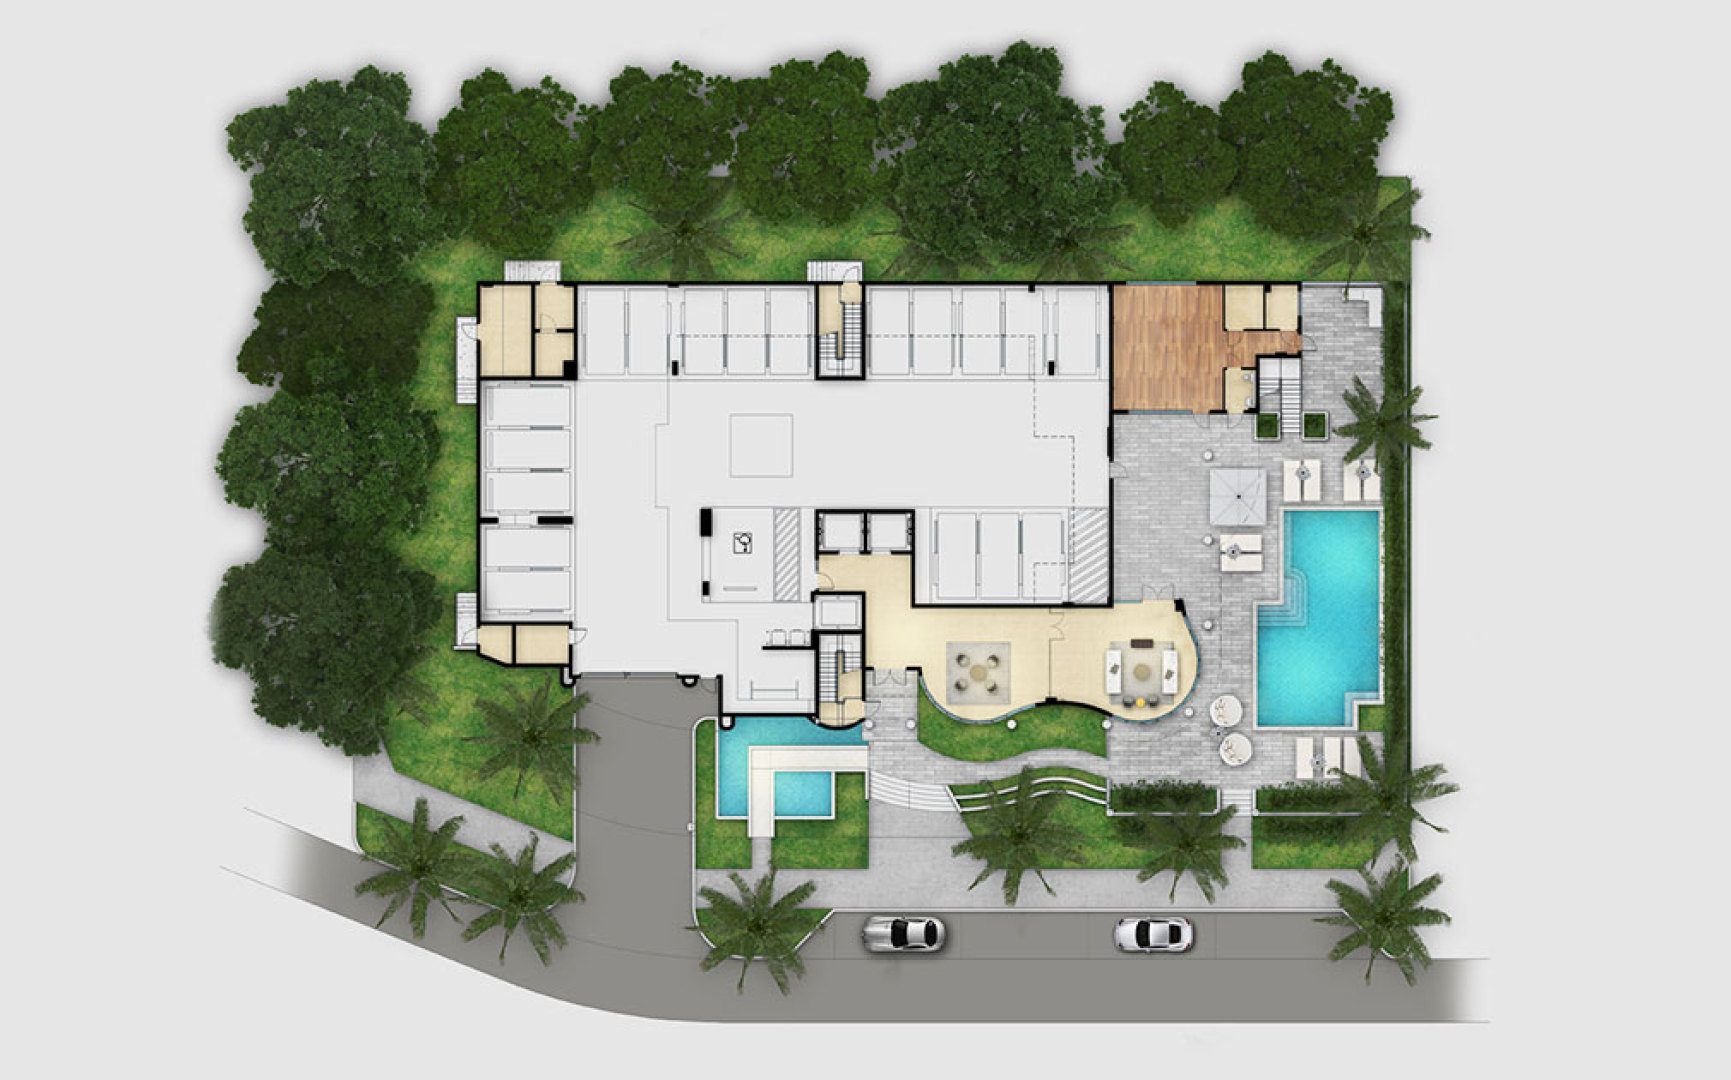 Siteplan for The Wave on Bayshore, Luxury Seaside Condos in Fort Lauderdale, Florida 33304